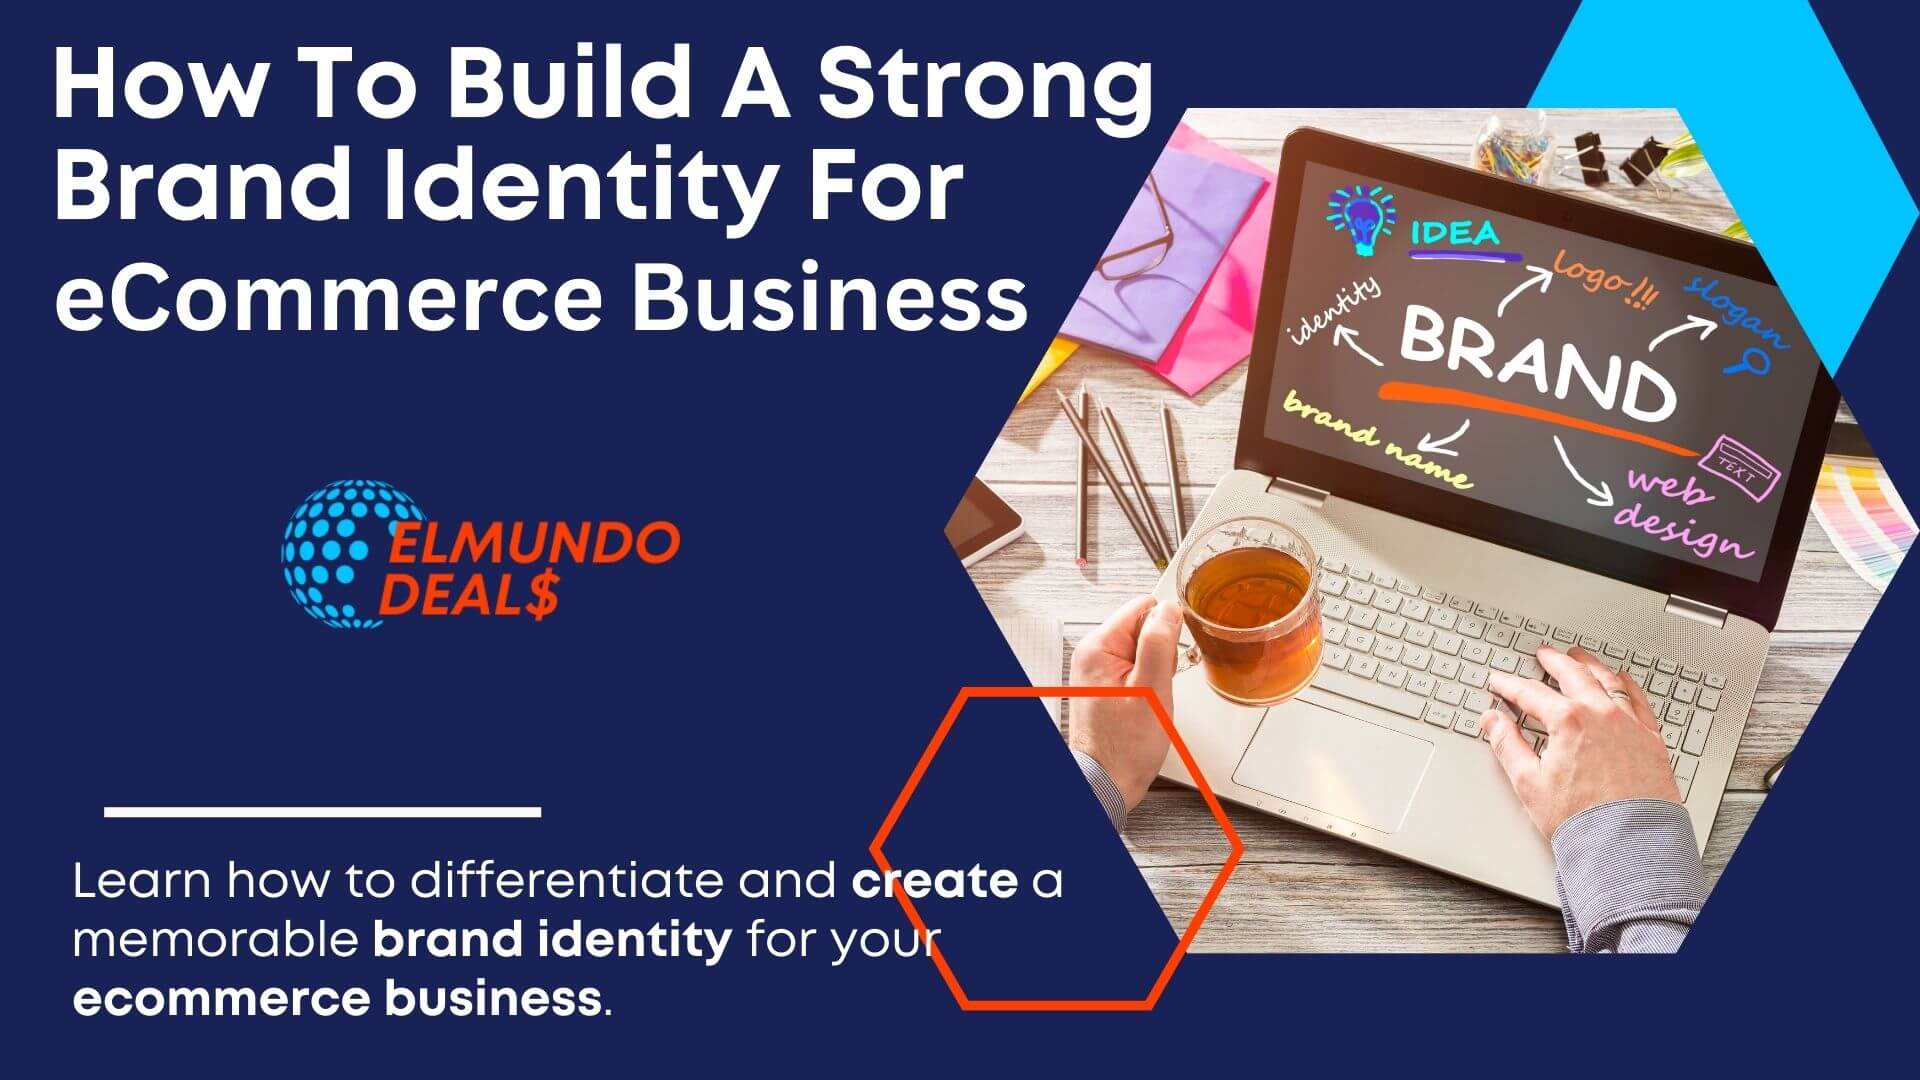 How To Build A Strong Brand Identity For Your Ecommerce Business